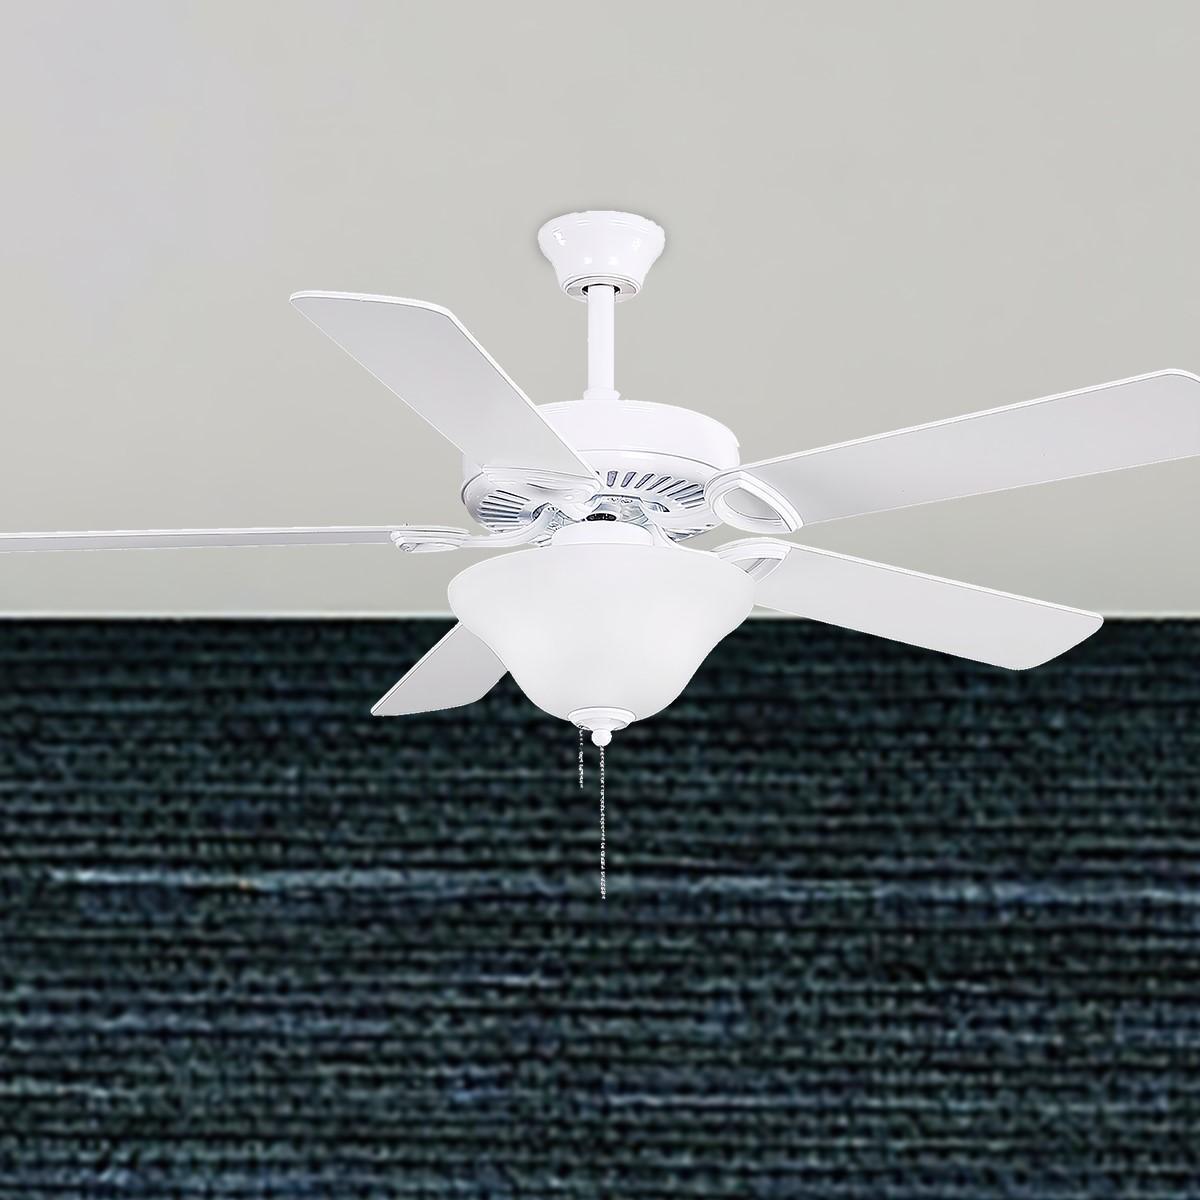 America USA 52 Inch 5 Blades Ceiling Fan With Light And Pull Chain, Gloss White Finish